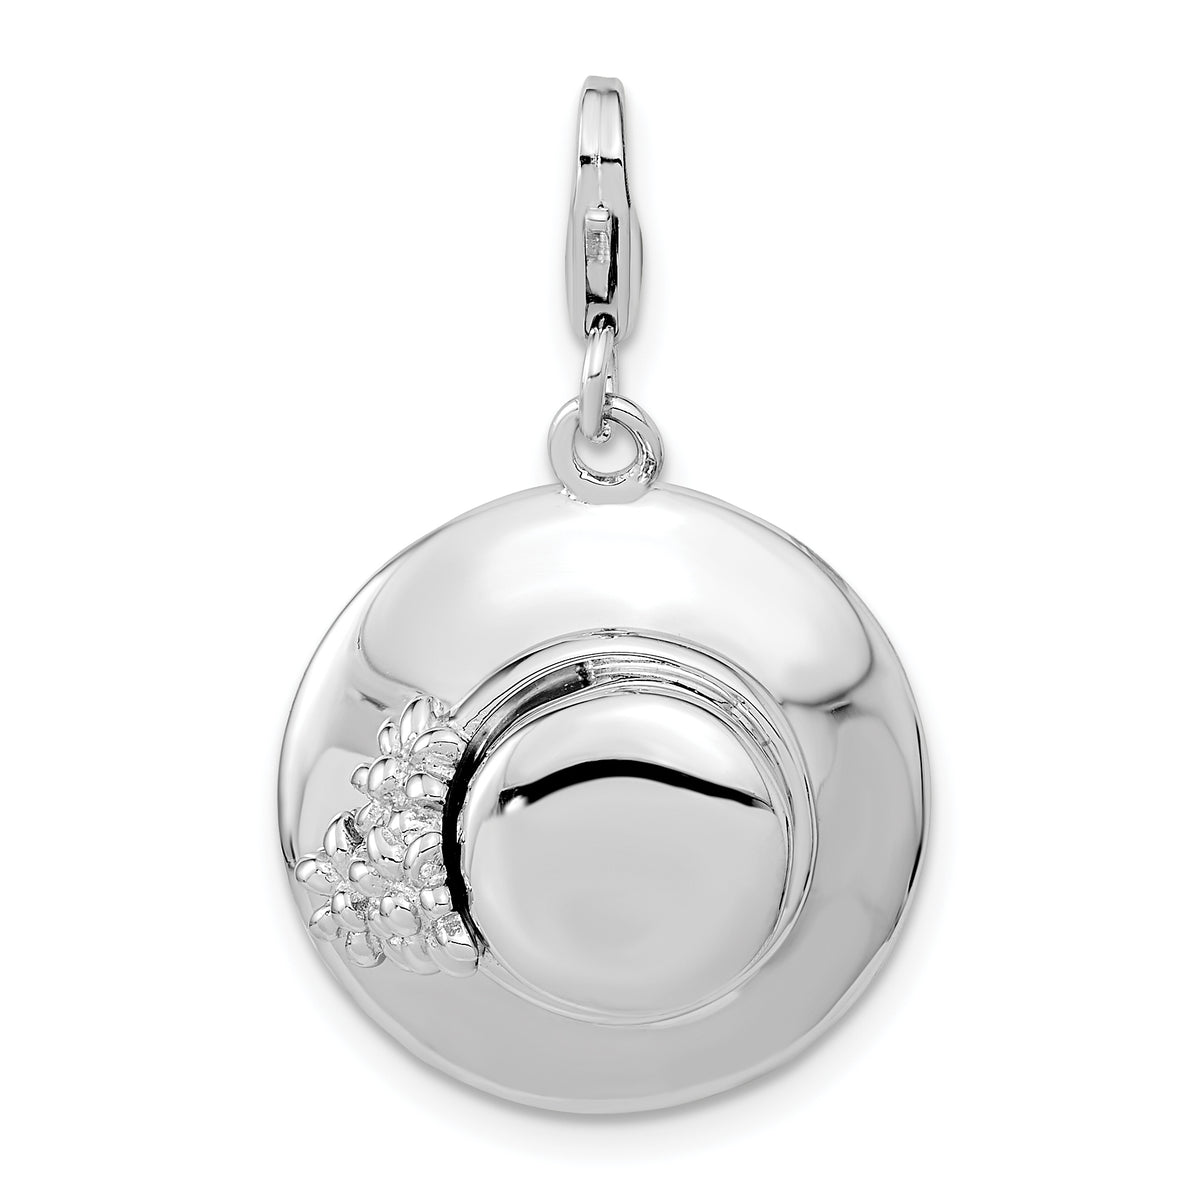 Amore La Vita Sterling Silver Rhodium-plated Polished 3-D Enameled Hat Charm with Fancy Lobster Clasp